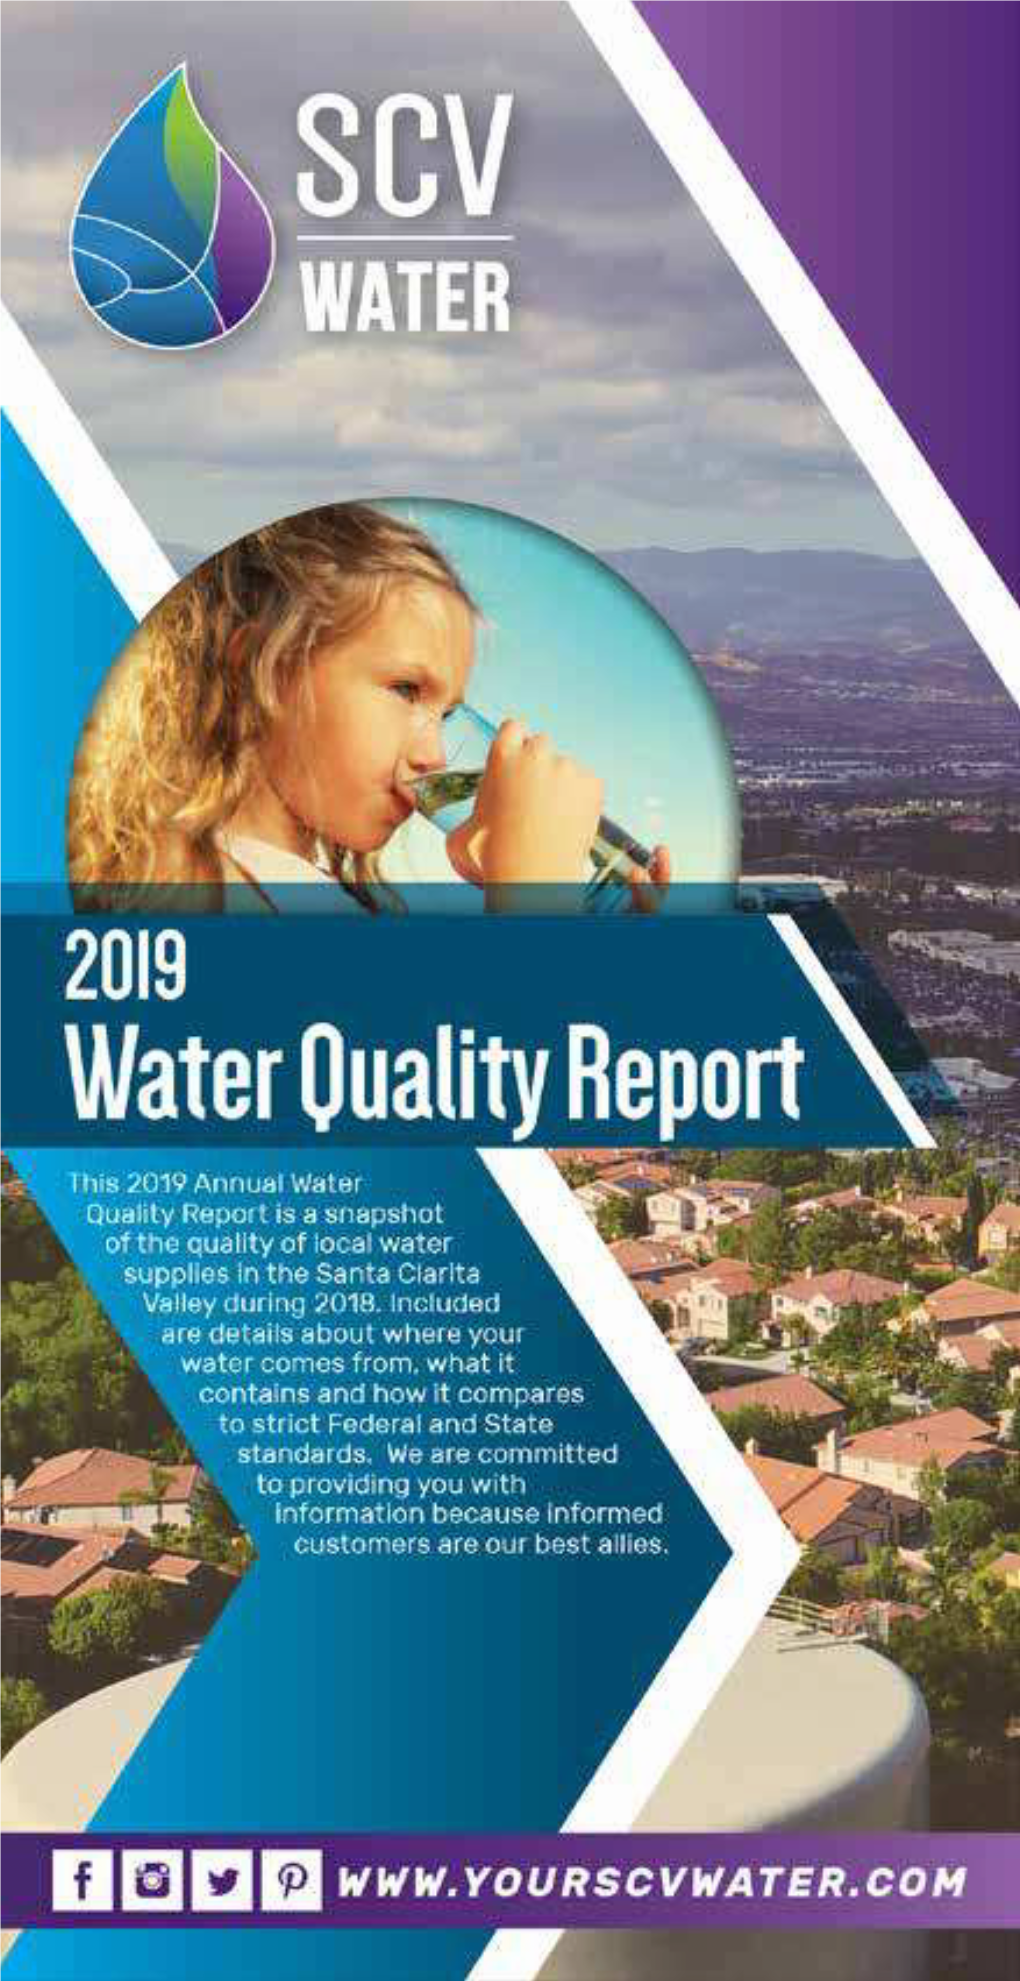 The Santa Clarita Valley 2019 Water Quality Report